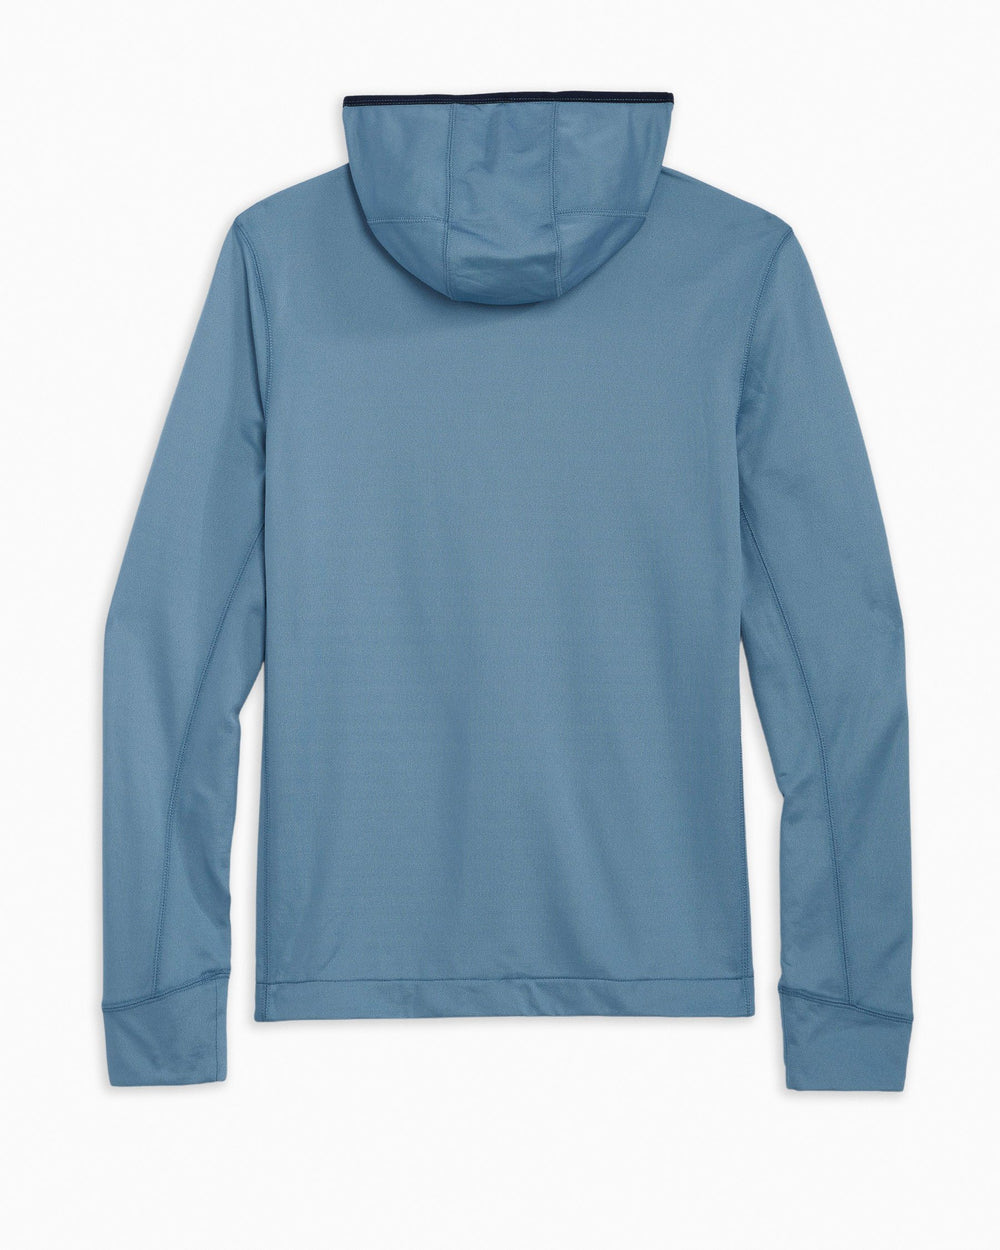 The back of the Men's Lockwood Fleece Performance Quarter Zip Hoodie by Southern Tide - French Lilac